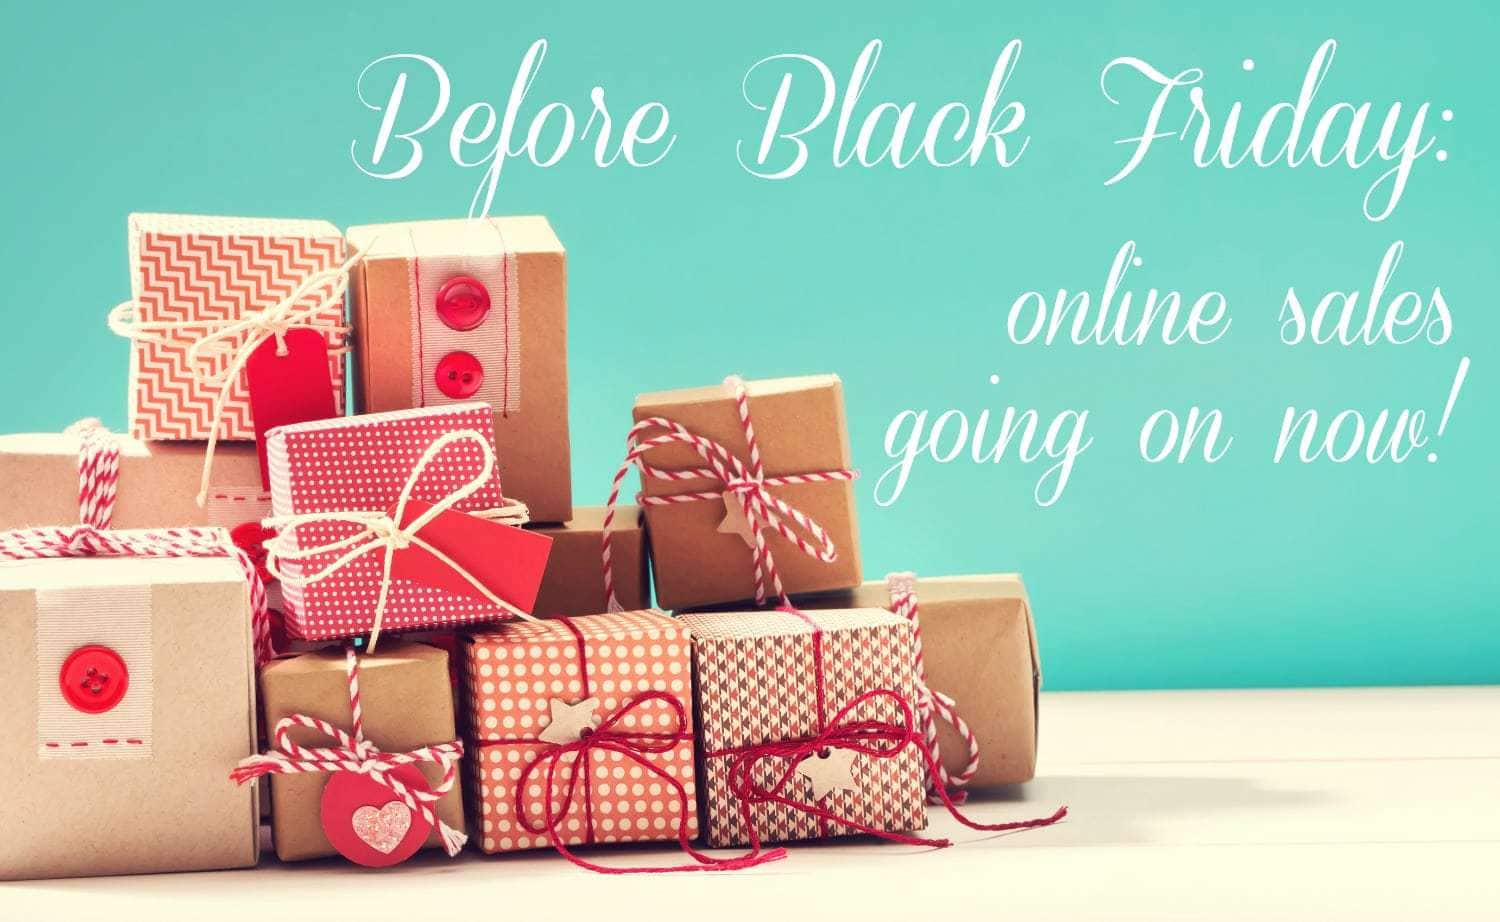 Before Black Friday: Sales and Promo Codes for Fashion and Beauty Deals before Thanksgiving